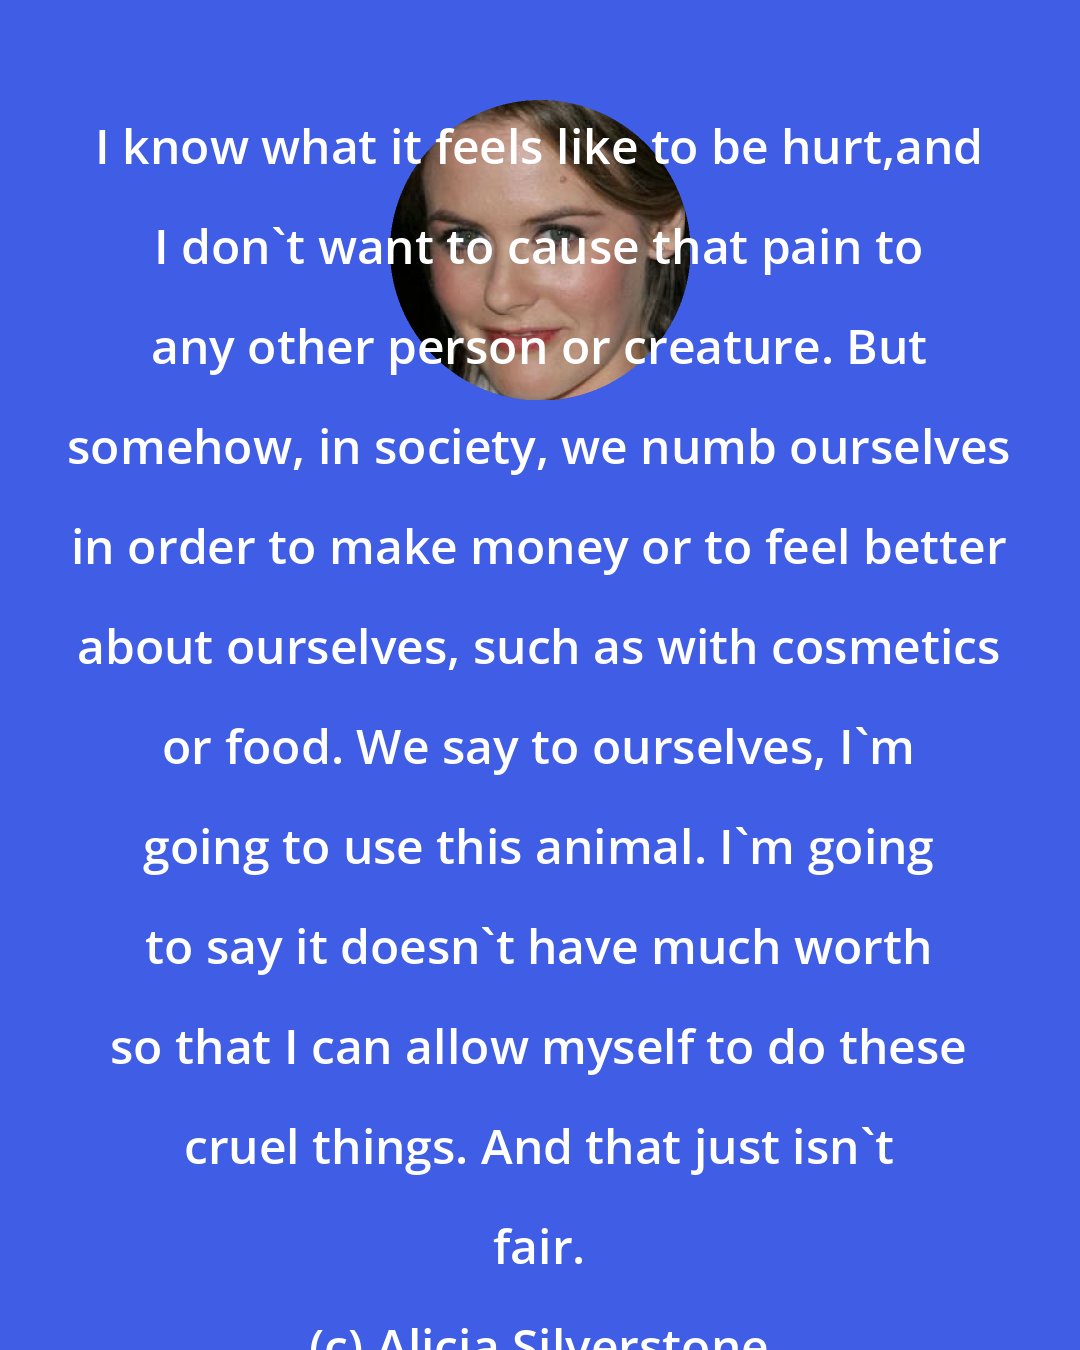 Alicia Silverstone: I know what it feels like to be hurt,and I don't want to cause that pain to any other person or creature. But somehow, in society, we numb ourselves in order to make money or to feel better about ourselves, such as with cosmetics or food. We say to ourselves, I'm going to use this animal. I'm going to say it doesn't have much worth so that I can allow myself to do these cruel things. And that just isn't fair.